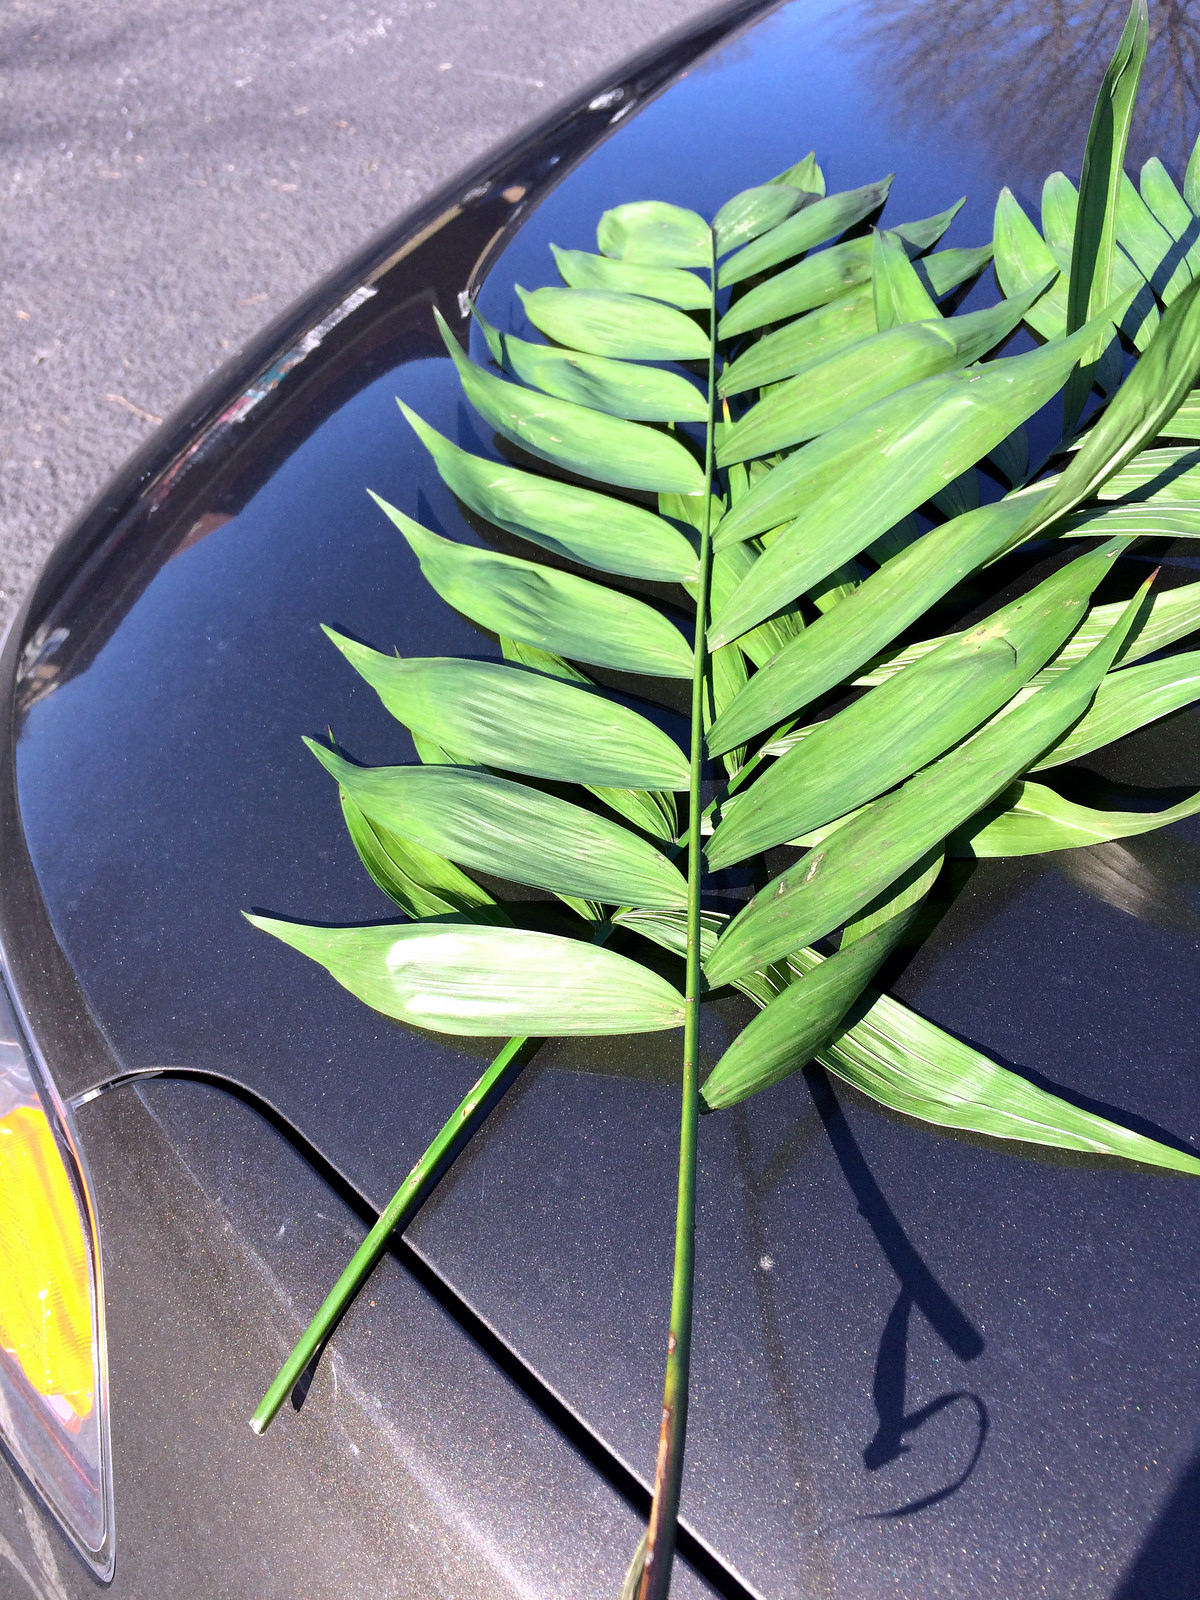 Palm leaves on the hood of a car | byzantiumbooks via Foter.com  -  CC BY